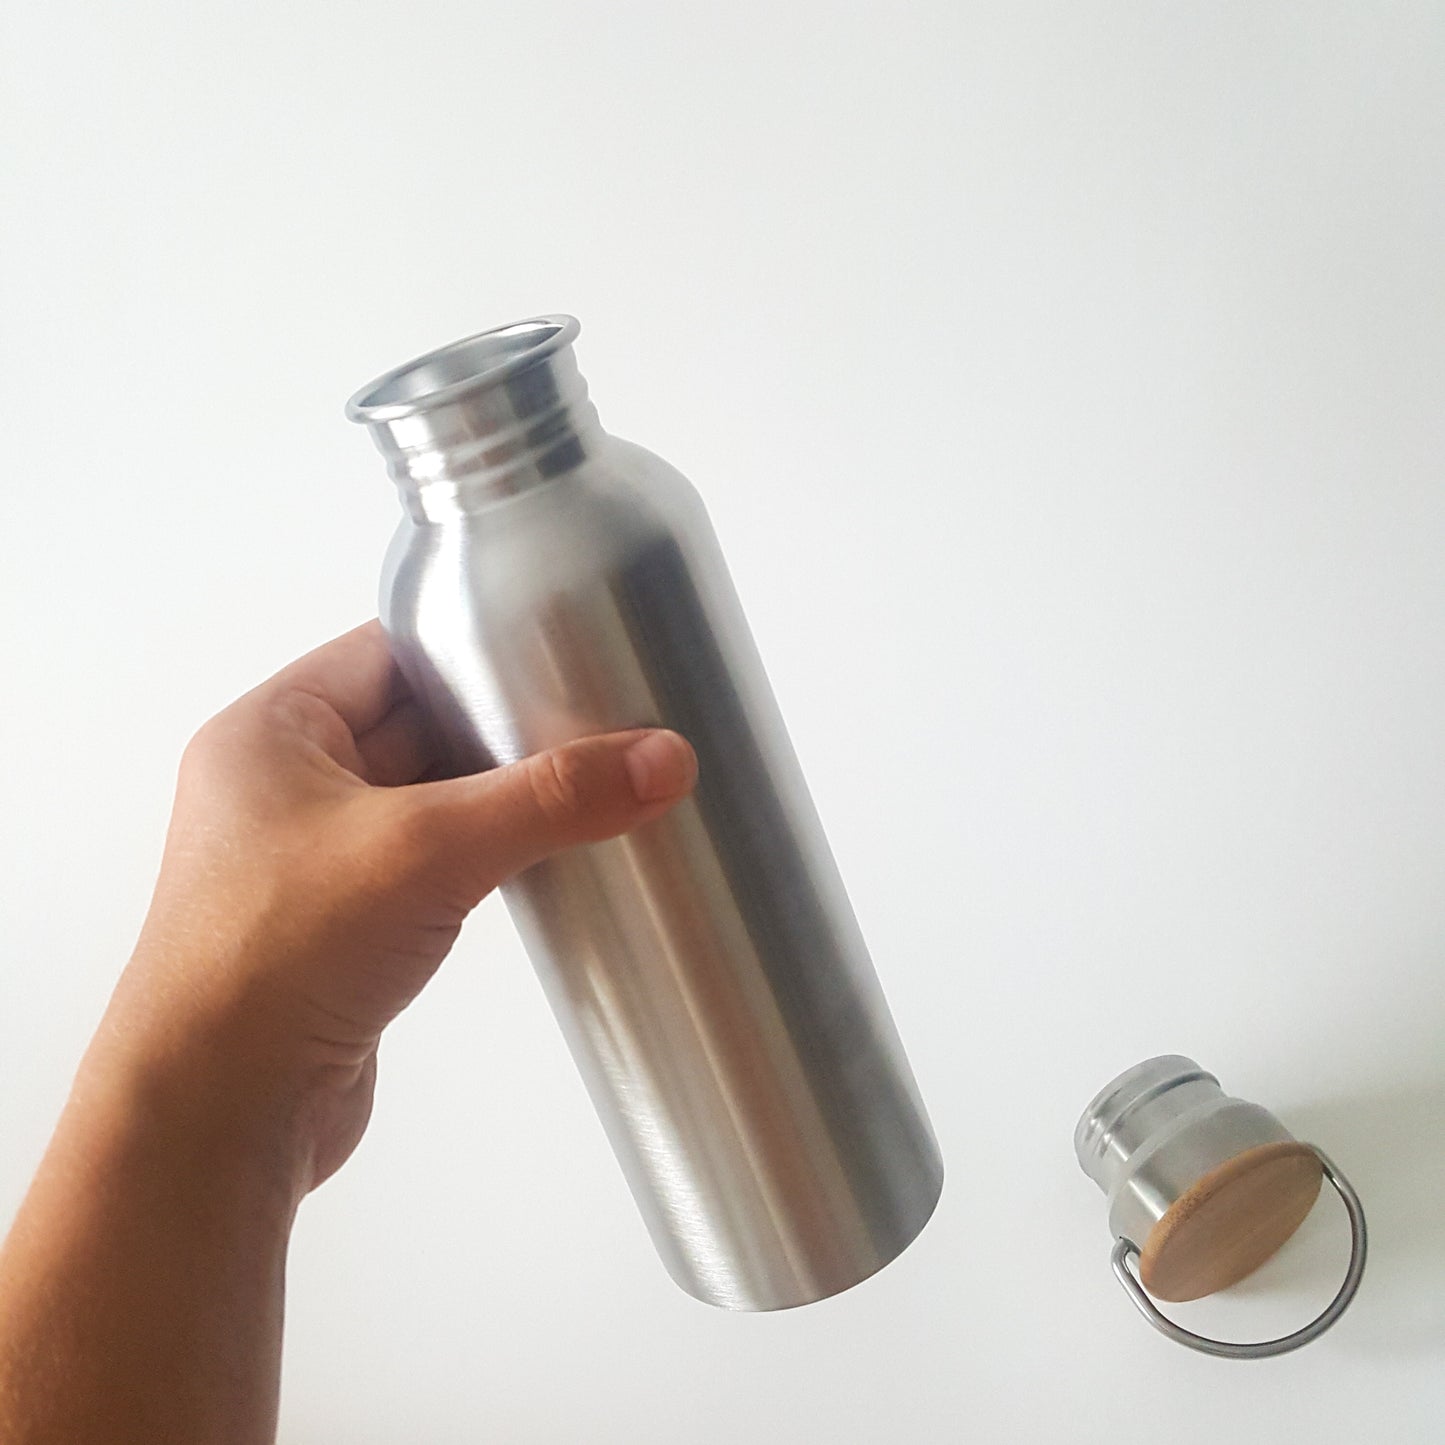 Reusable Stainless Steel Bottle 750 ml with bamboo screw top